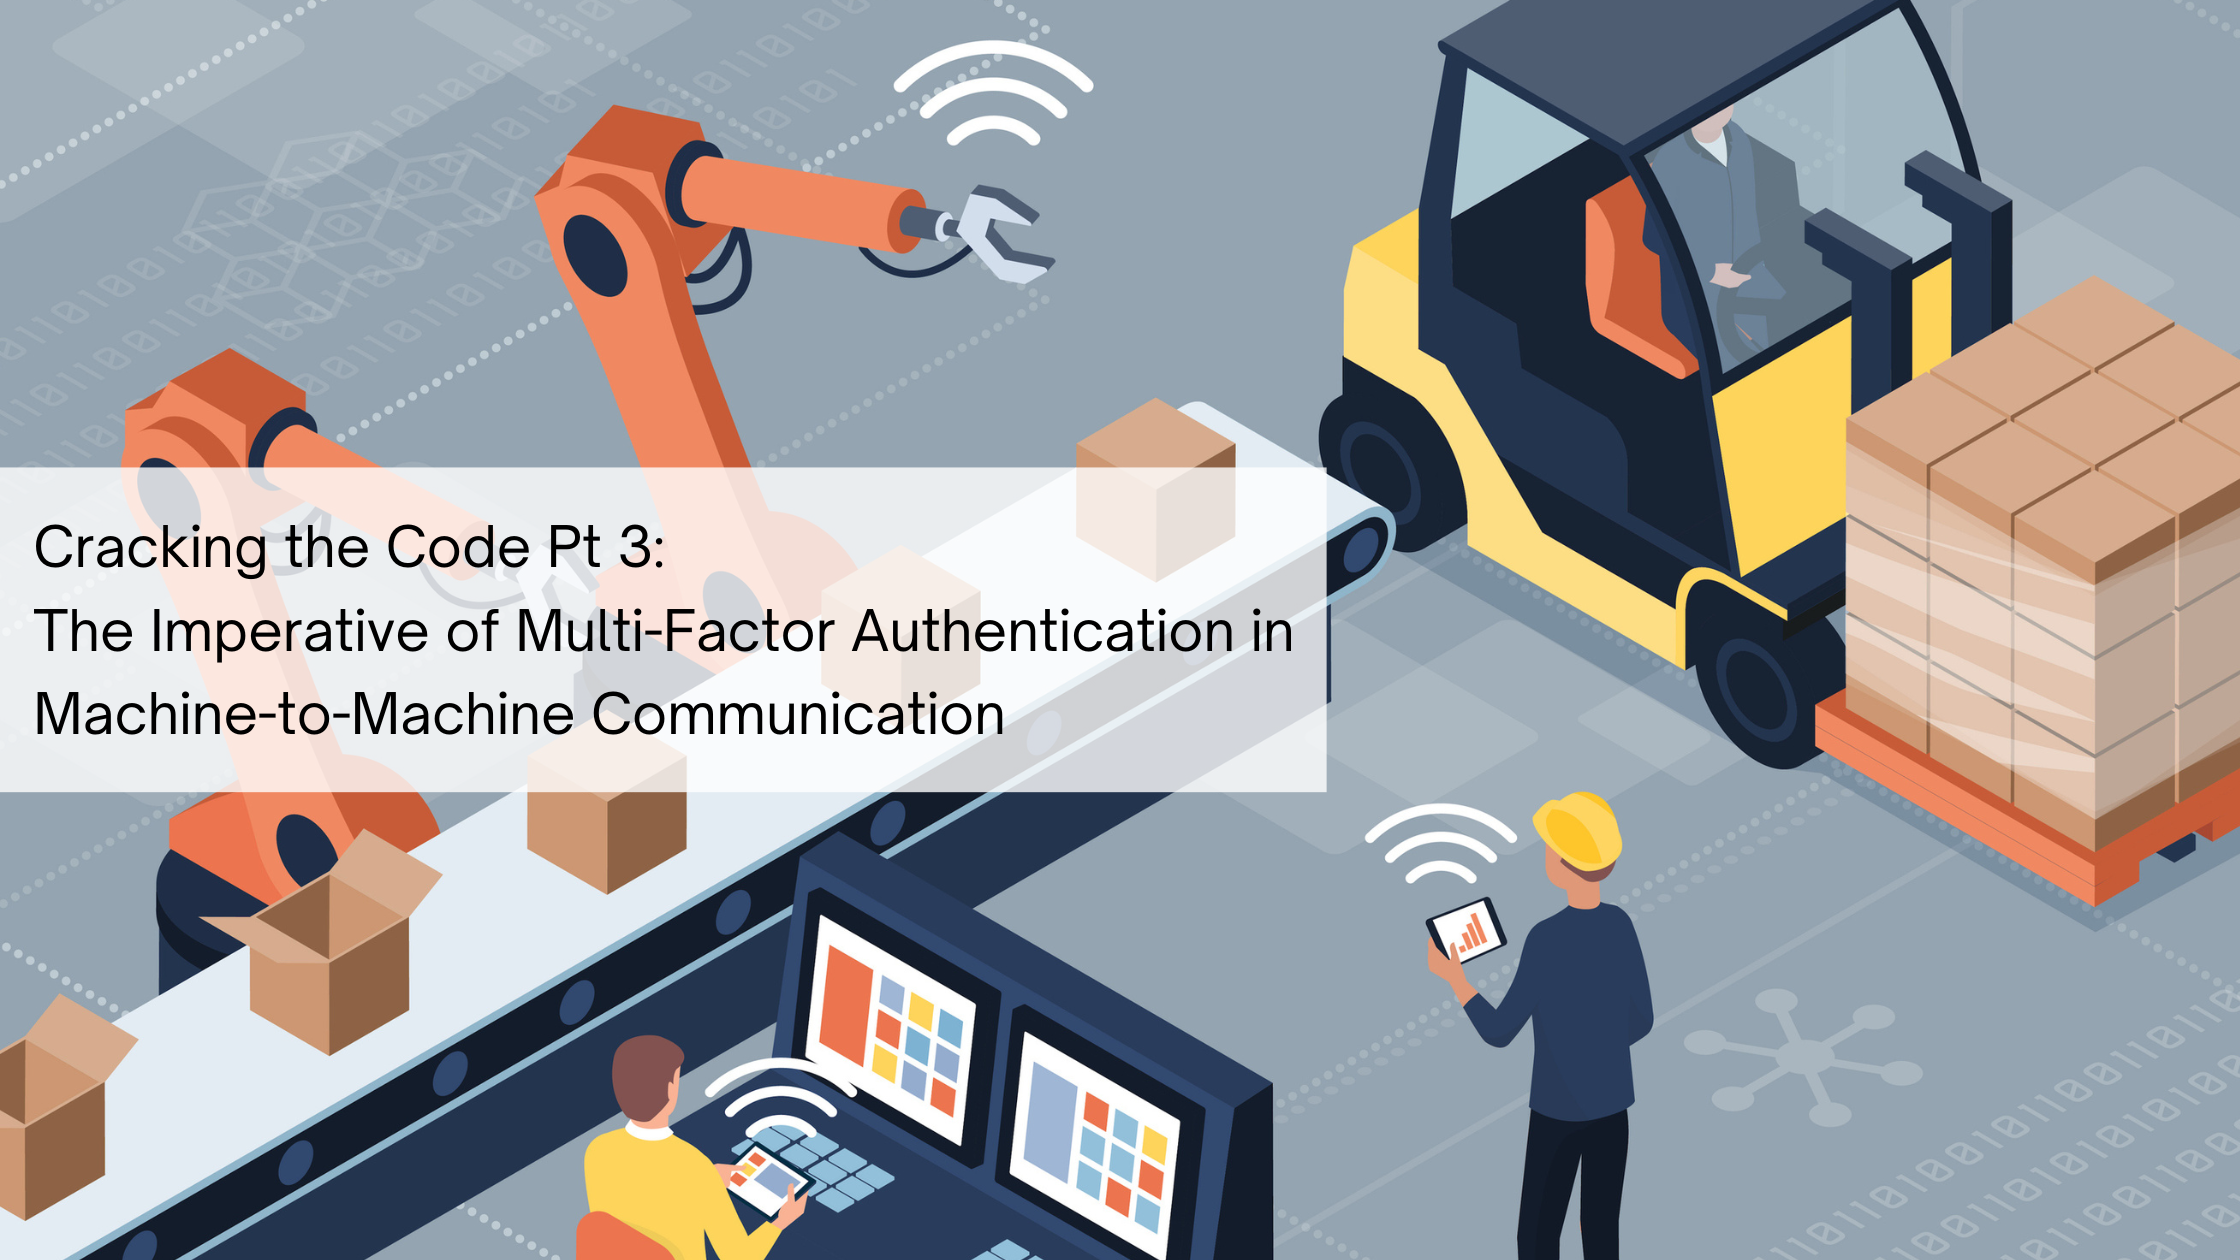 Cracking the Code Pt 3: The Imperative of Multi-Factor Authentication in Machine-to-Machine Communication